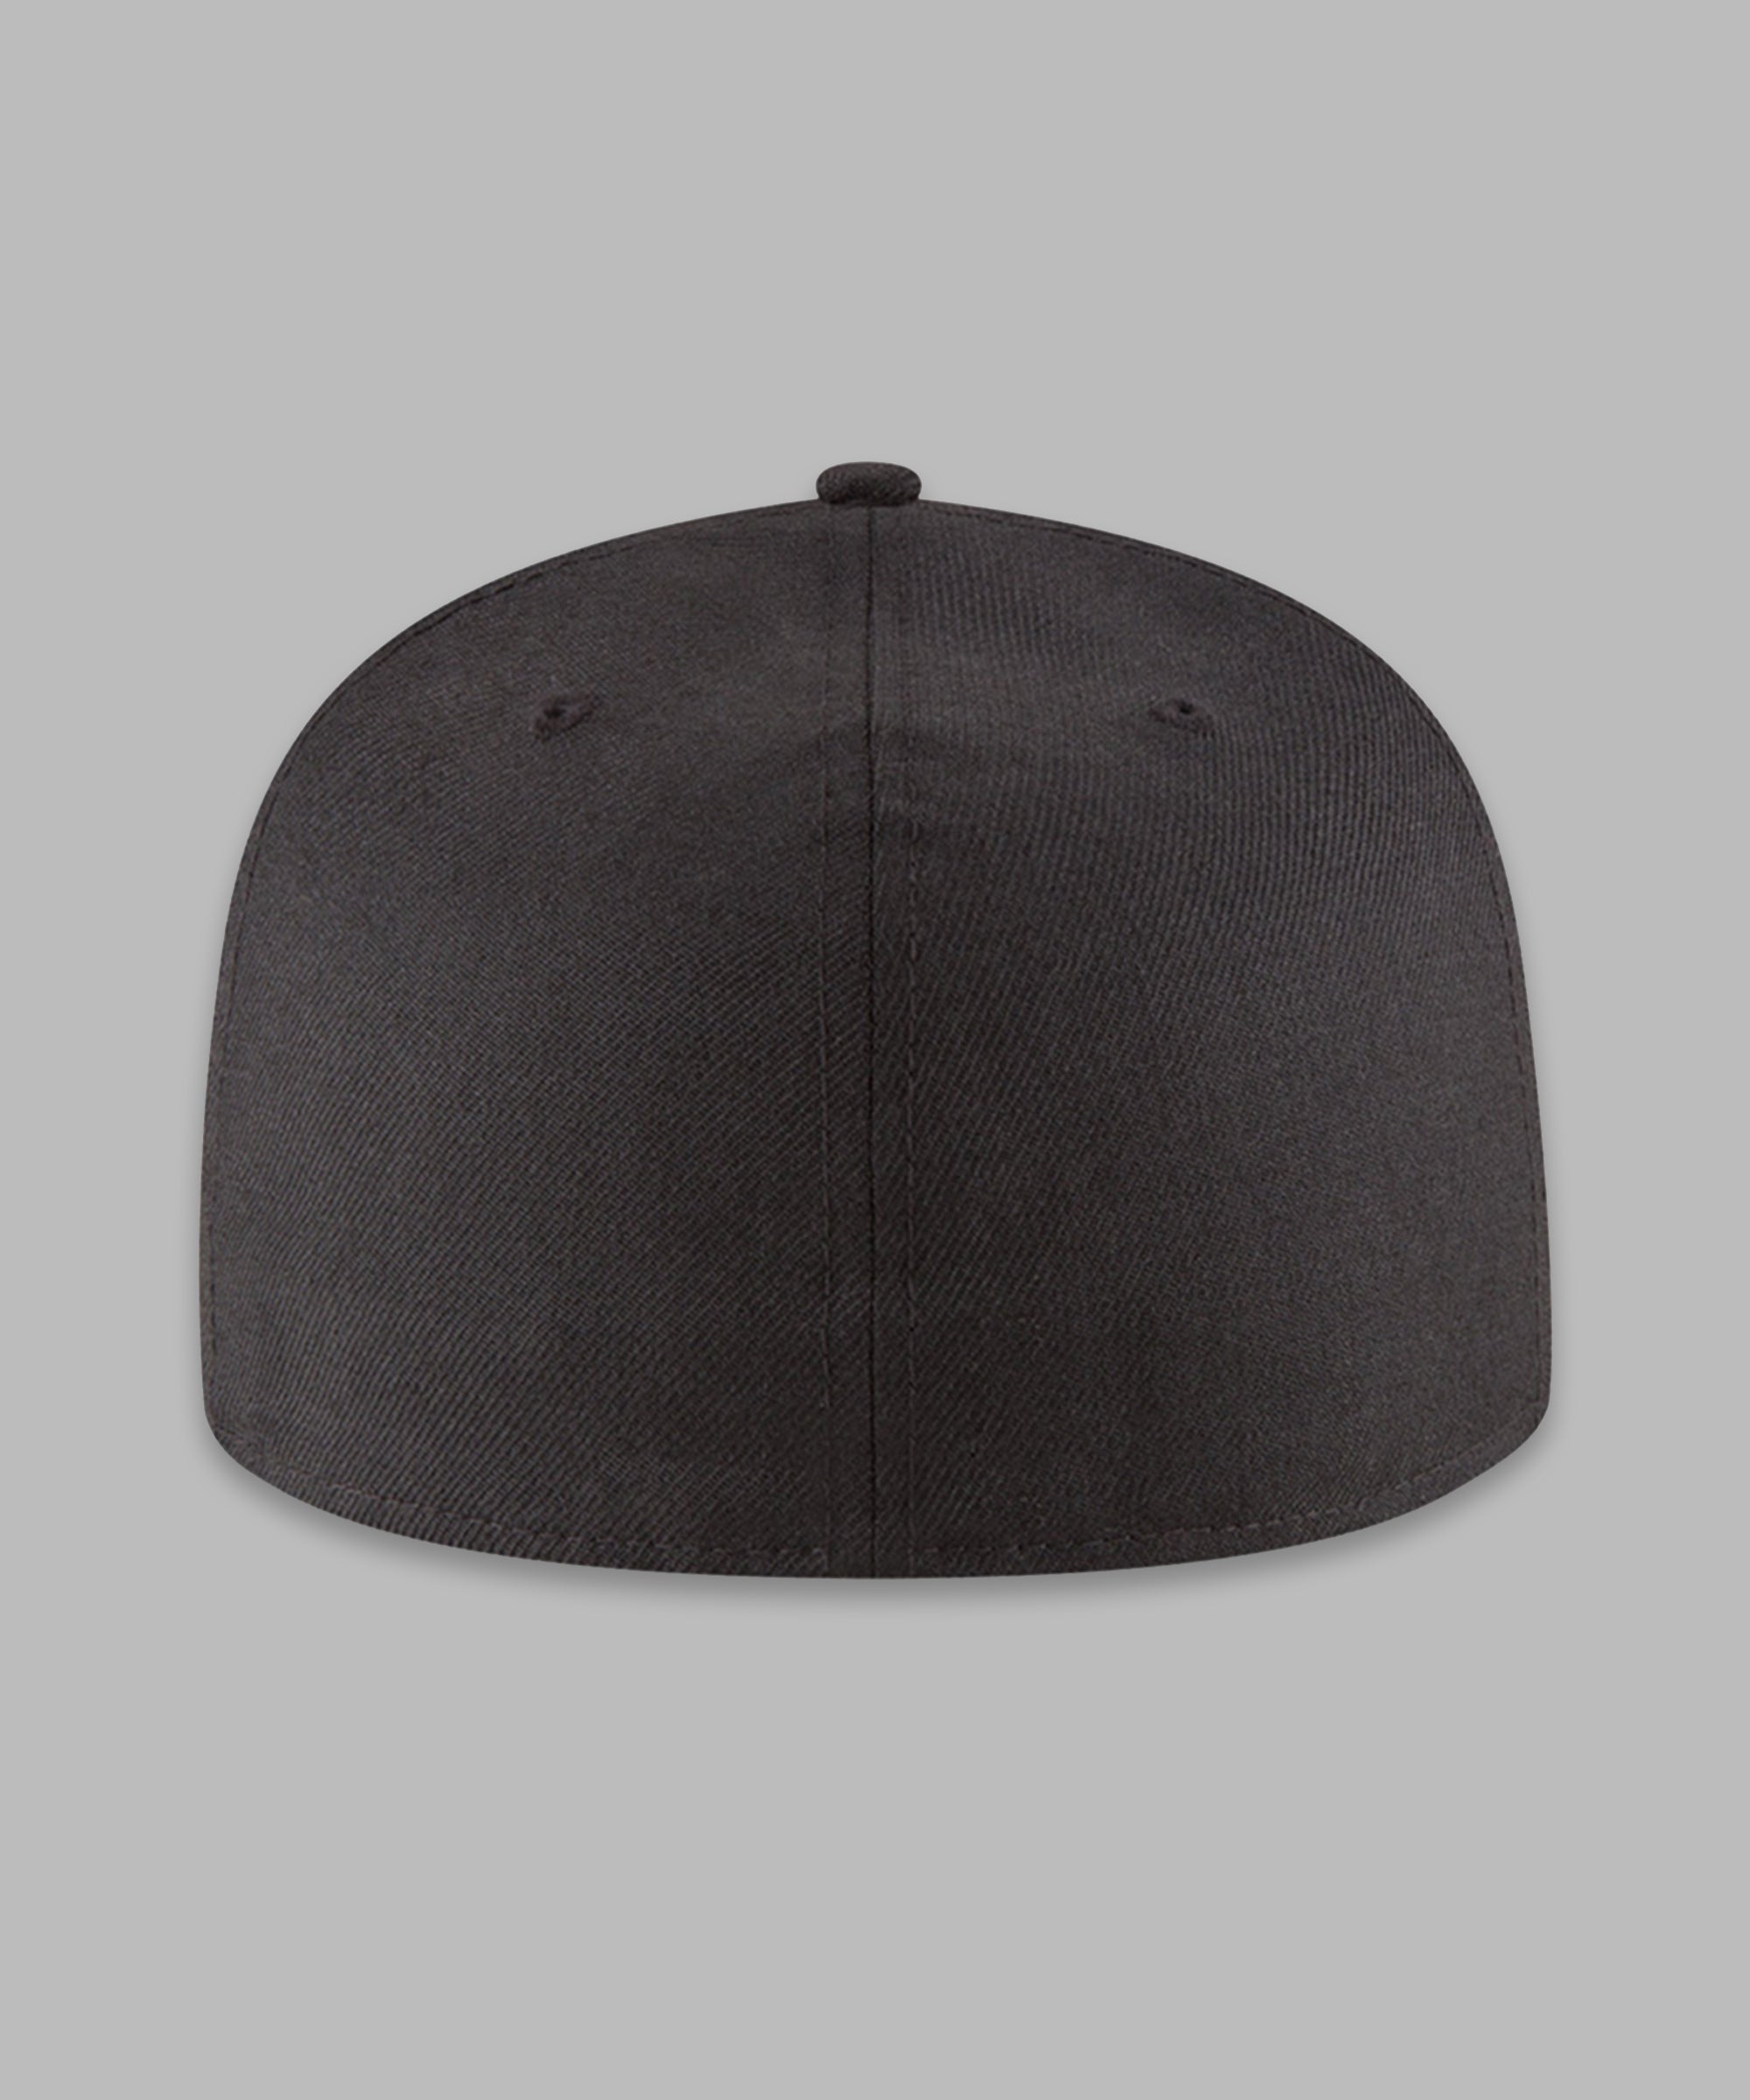 THE ORIGINAL CROWN FITTED W/ BLACK UNDERVISOR — embroidery area